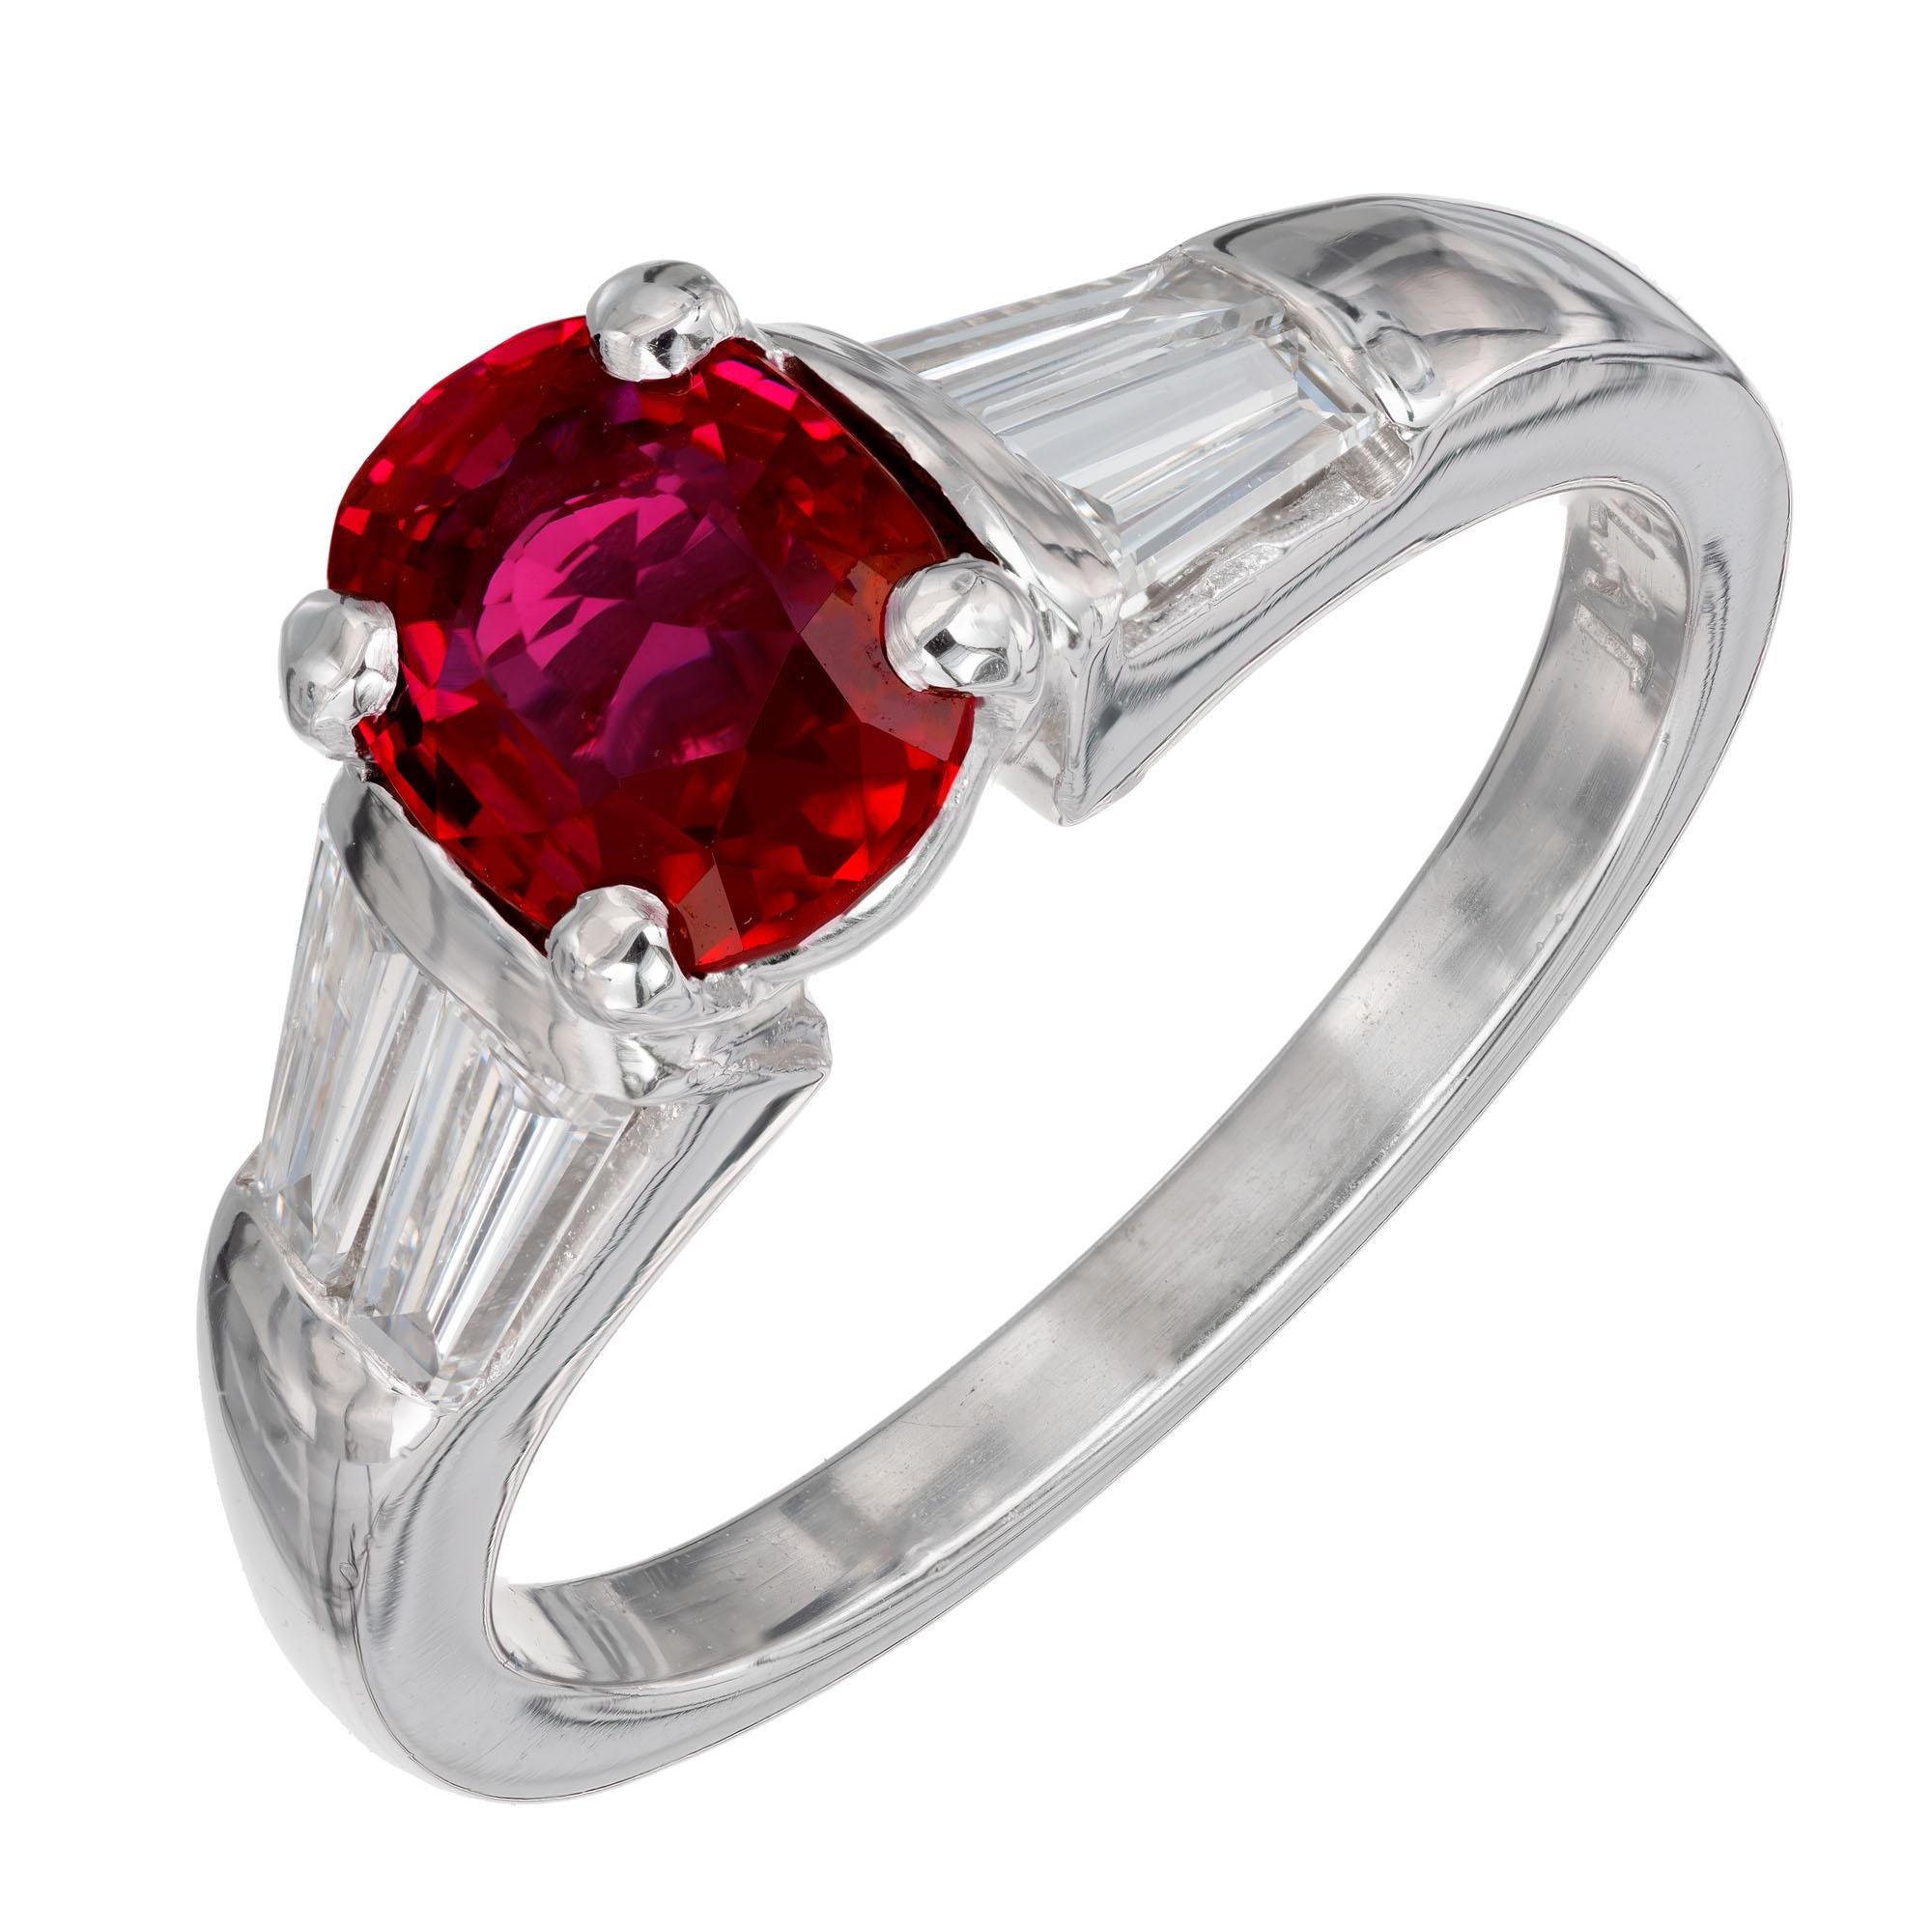 Natural no heat GIA certified oval 1.10 carat ruby and diamond engagement ring. Oval ruby center stone accented with 4 tapered baguette side diamonds, in a platinum setting, created by the Peter Suchy Workshop. 

1 oval red ruby, approx. 1.10cts GIA